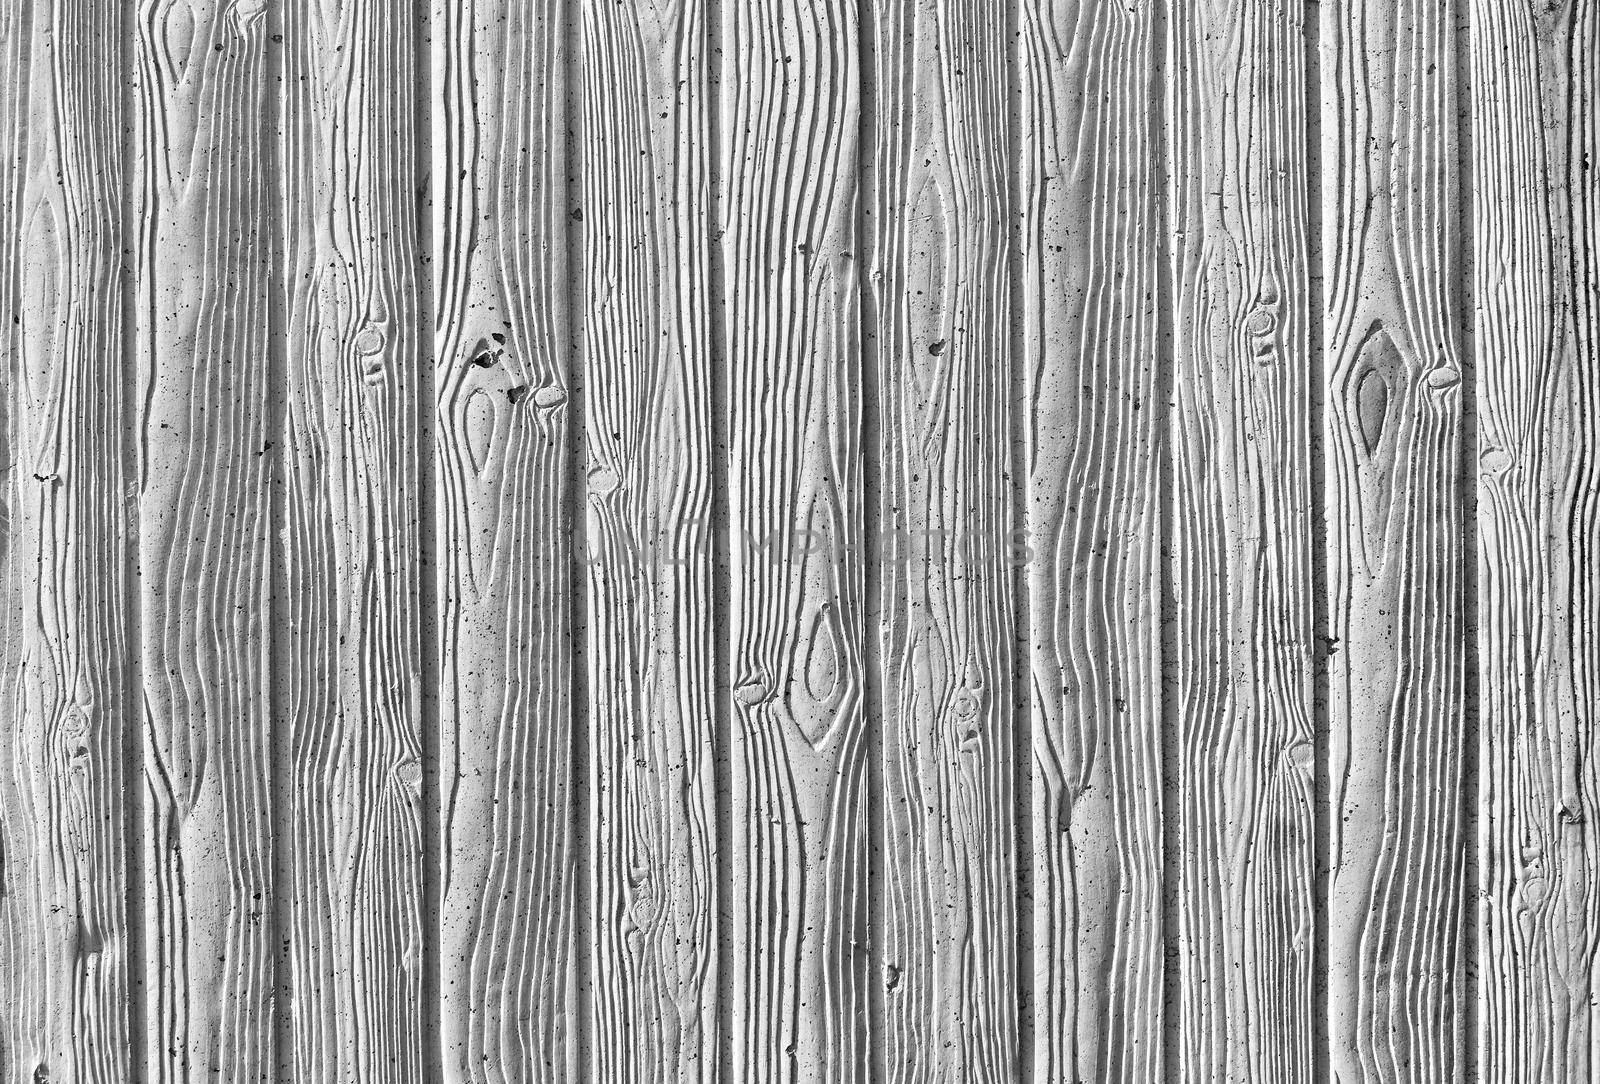 Imprint of wood texture in cast concrete - wood texture